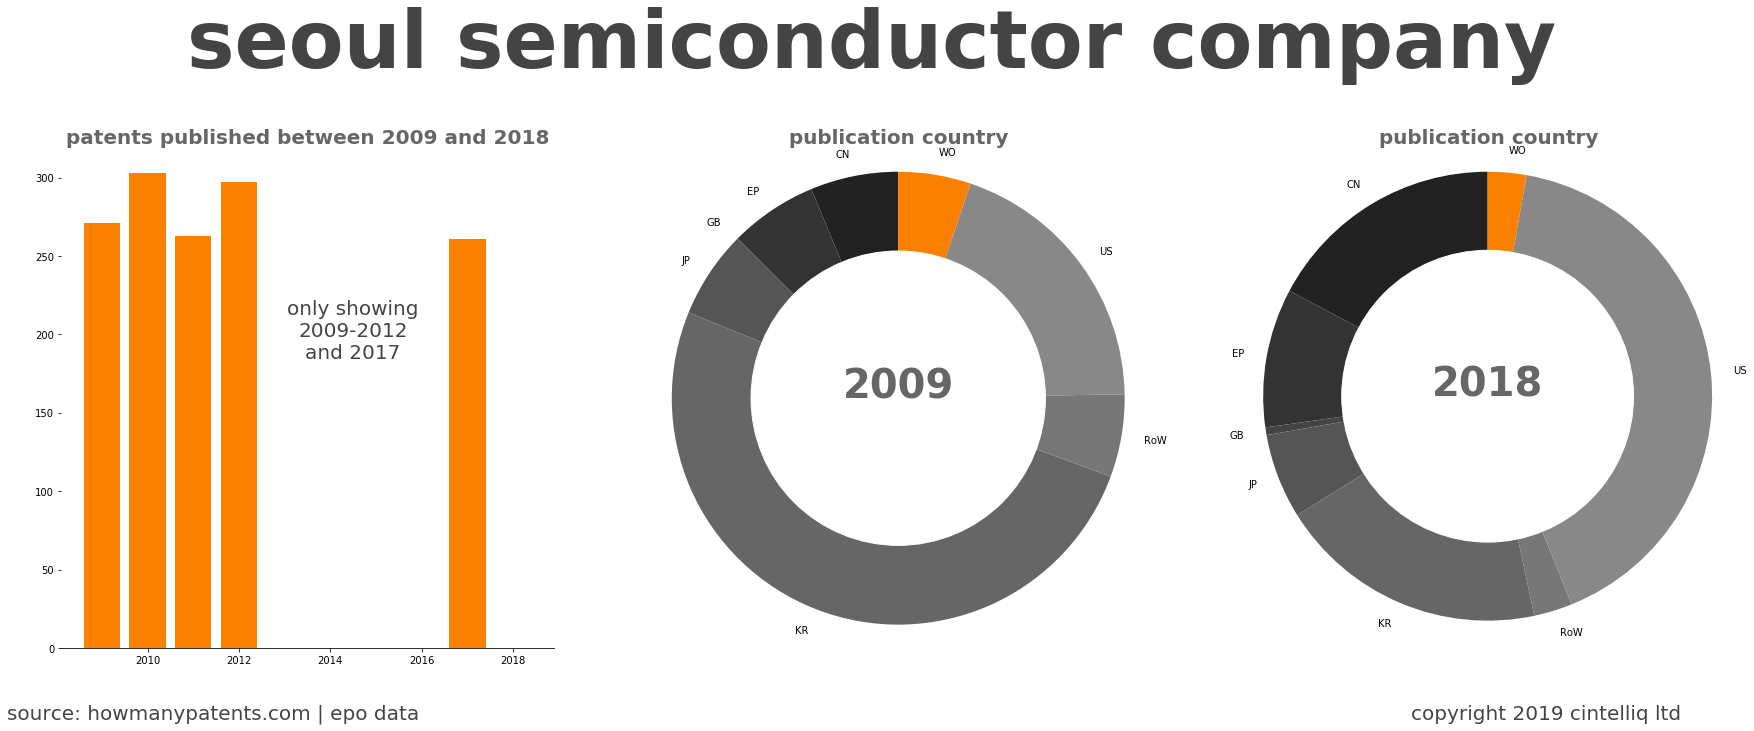 summary of patents for Seoul Semiconductor Company